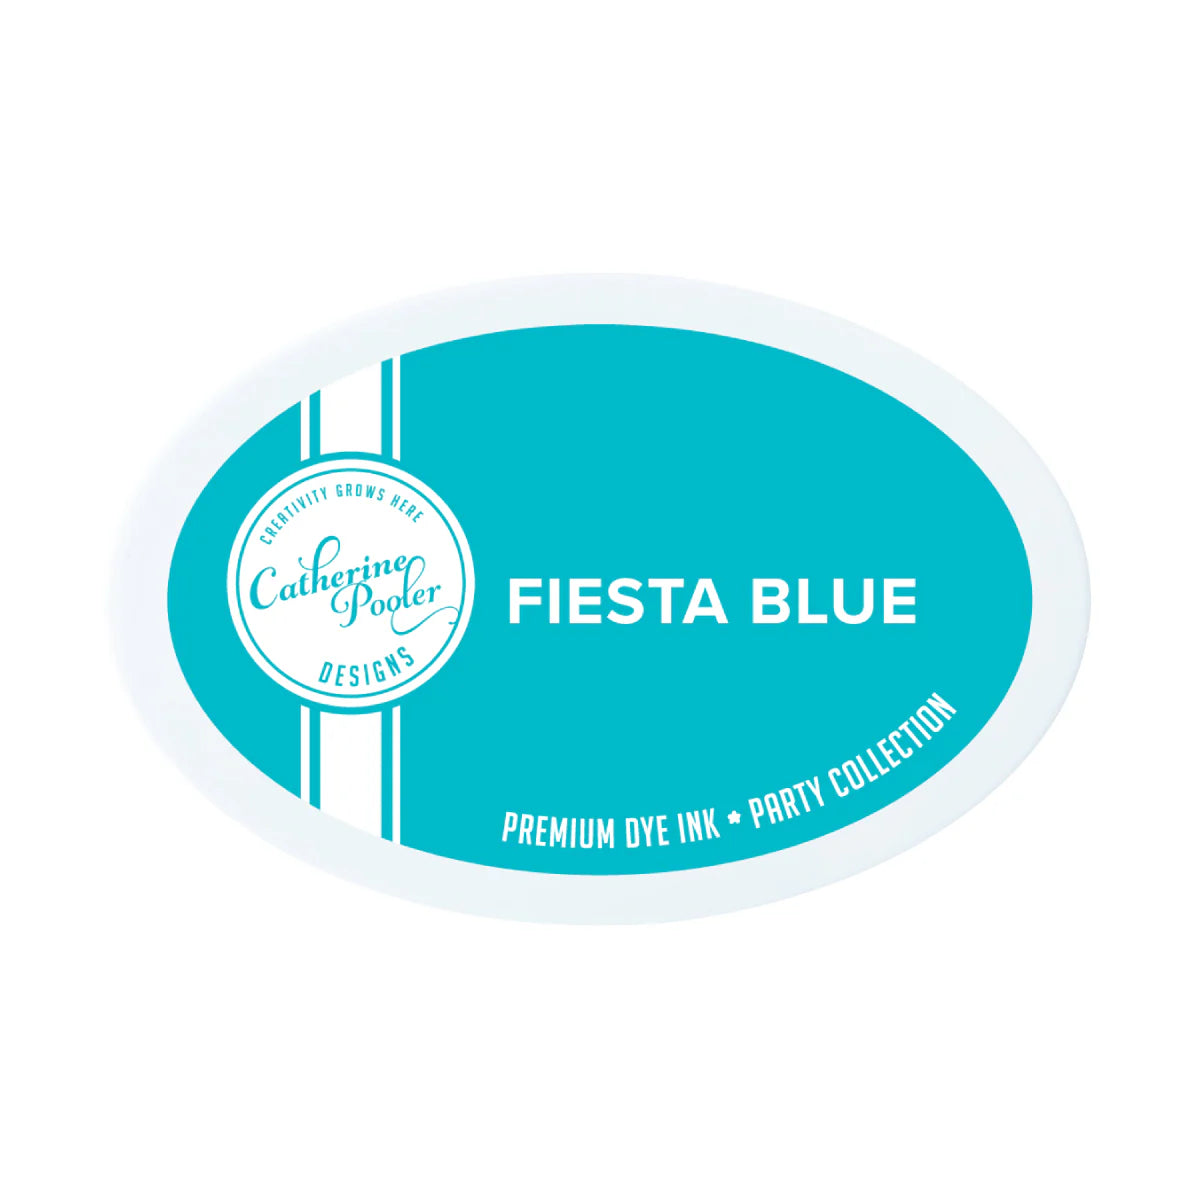 Fiesta Blue Premium Dye Ink Pad - Party Collection